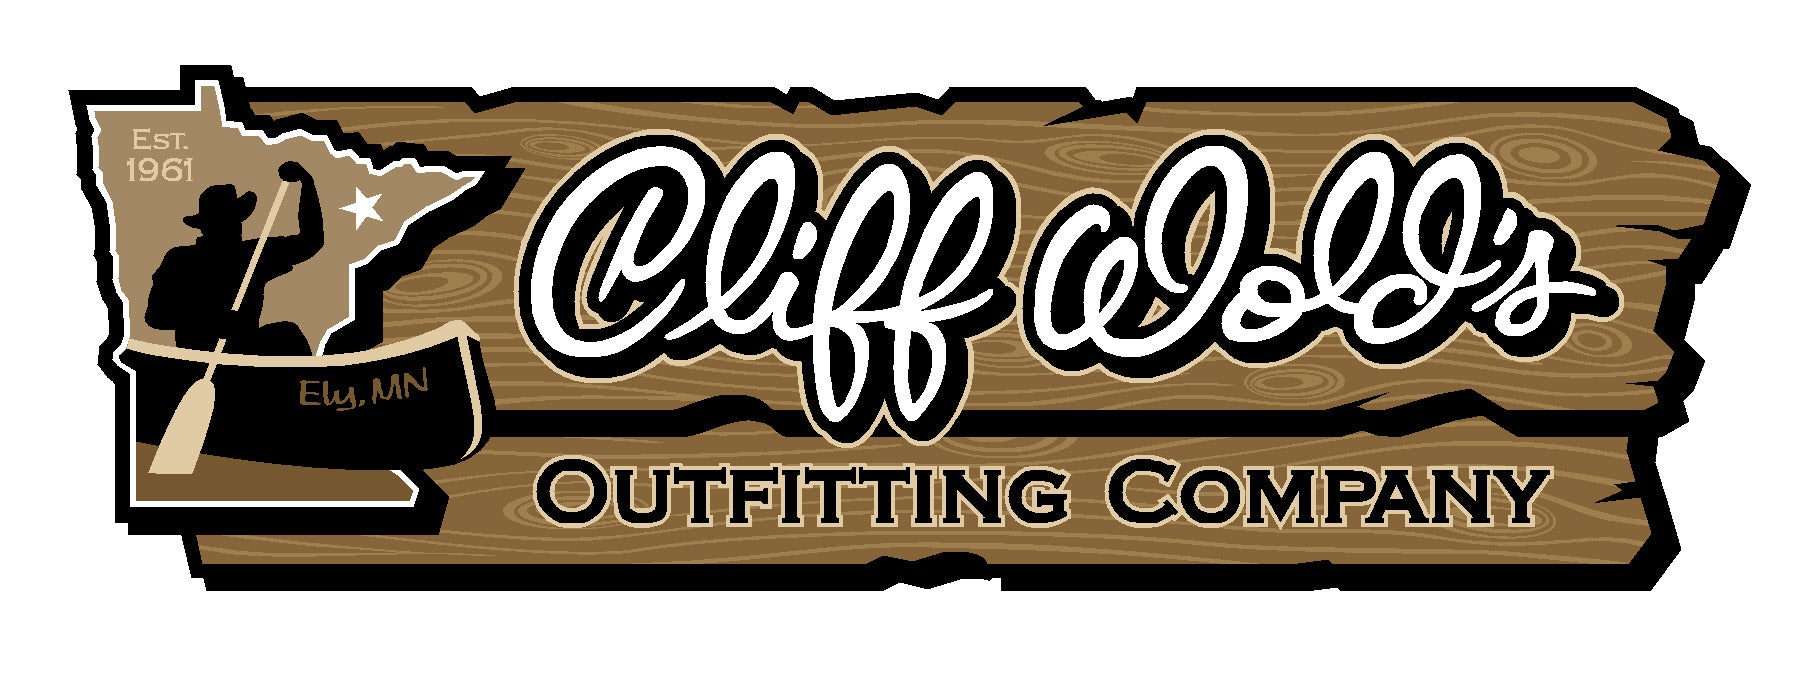 Cliff Wold's Outfitting Co.